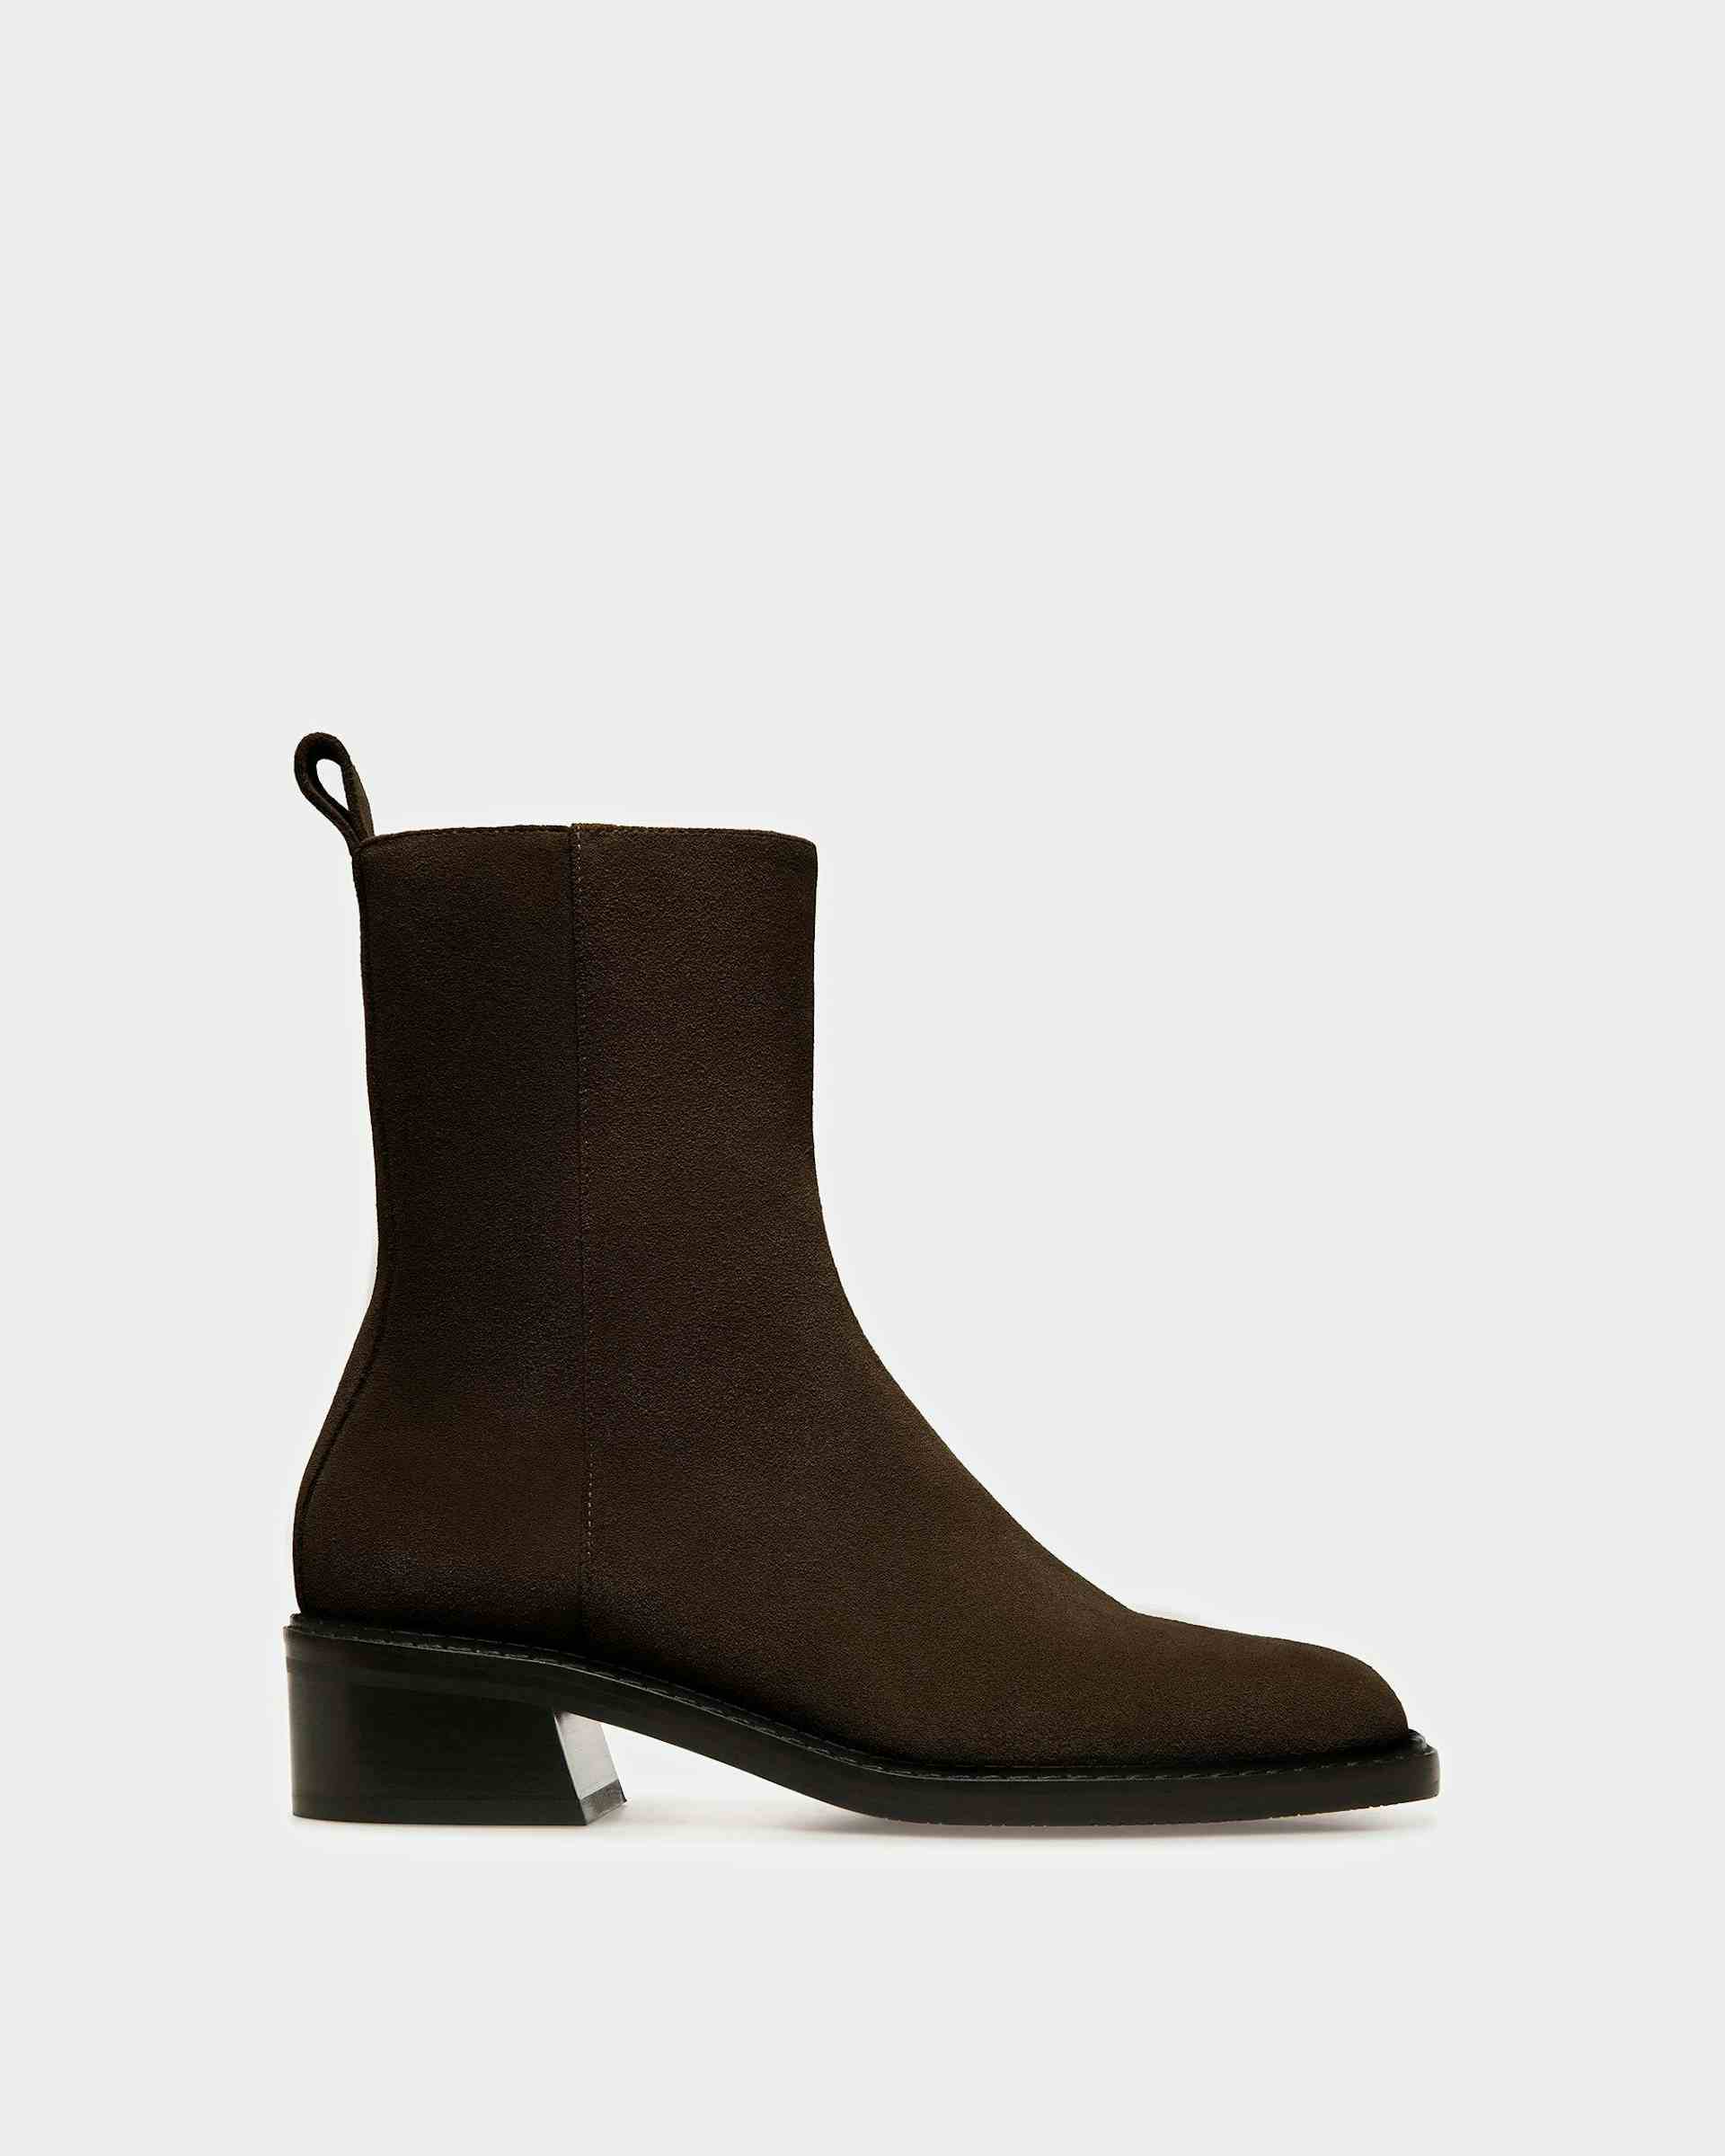 Austine Leather Boots In Ebony Brown - Women's - Bally